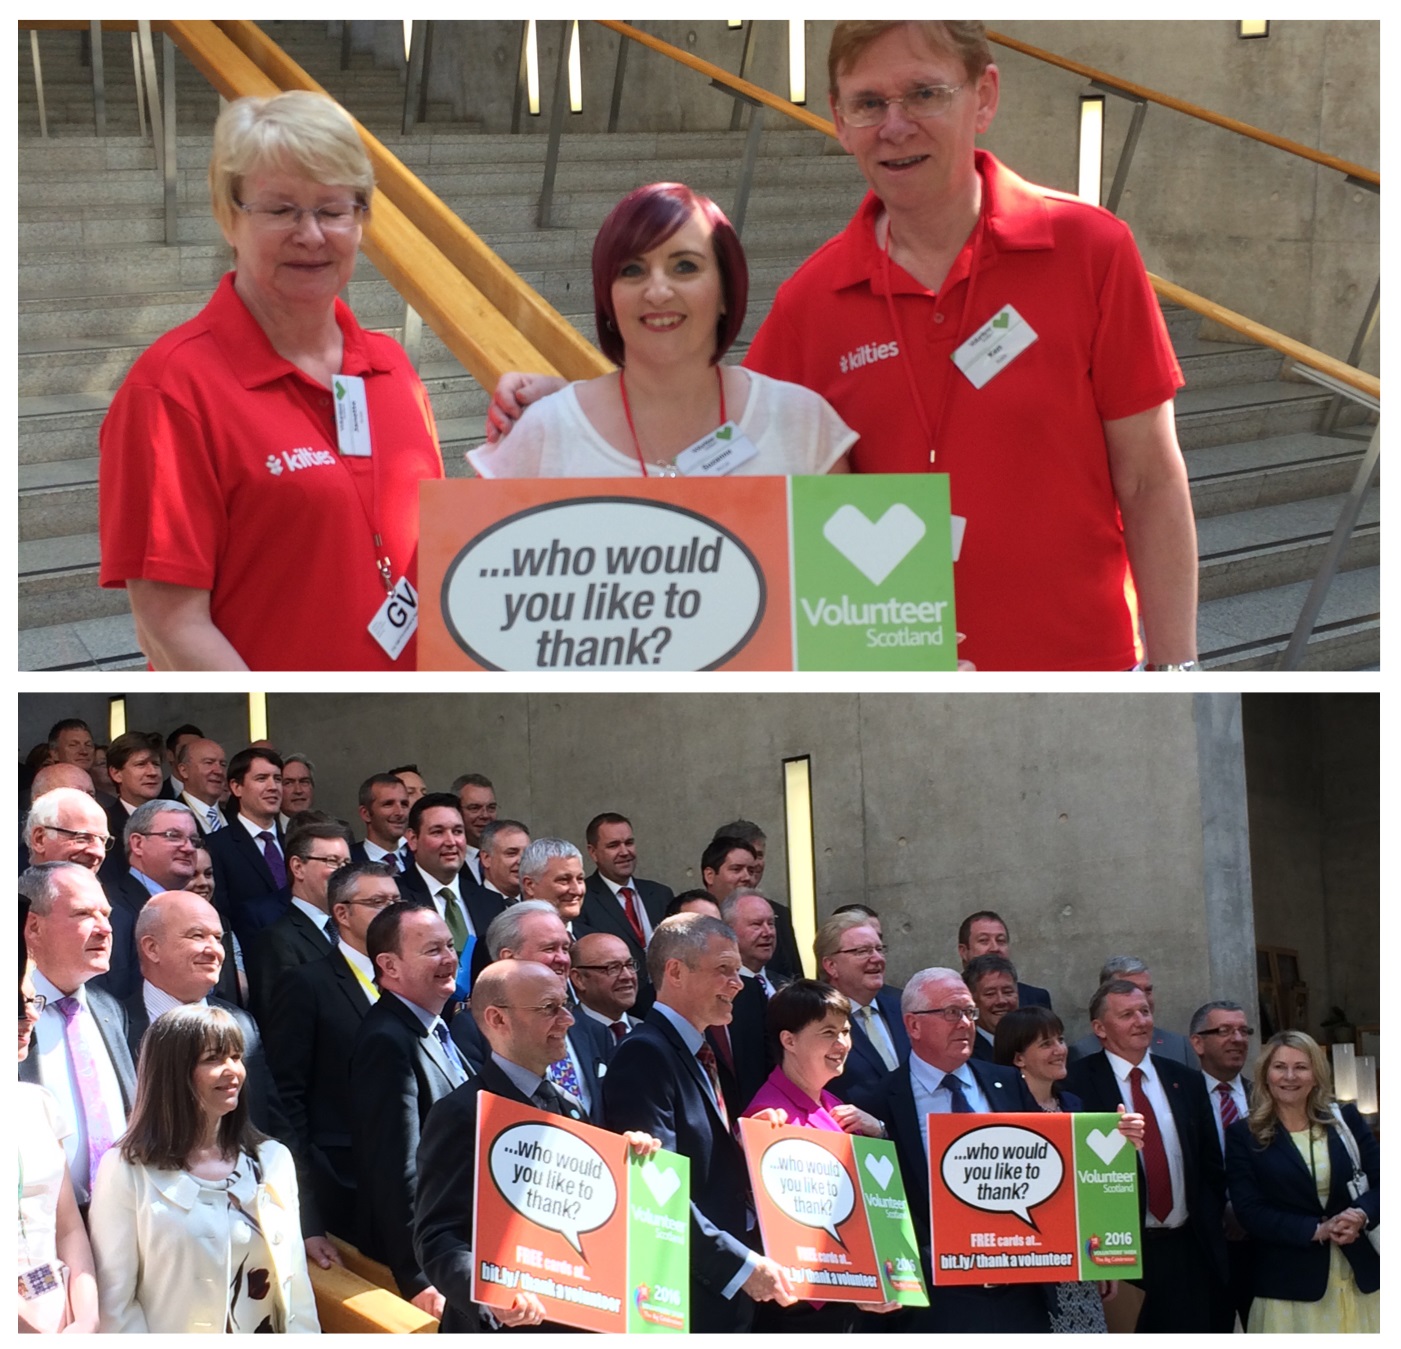 Suzanne at the Scottish parliament with Volunteer Scotland